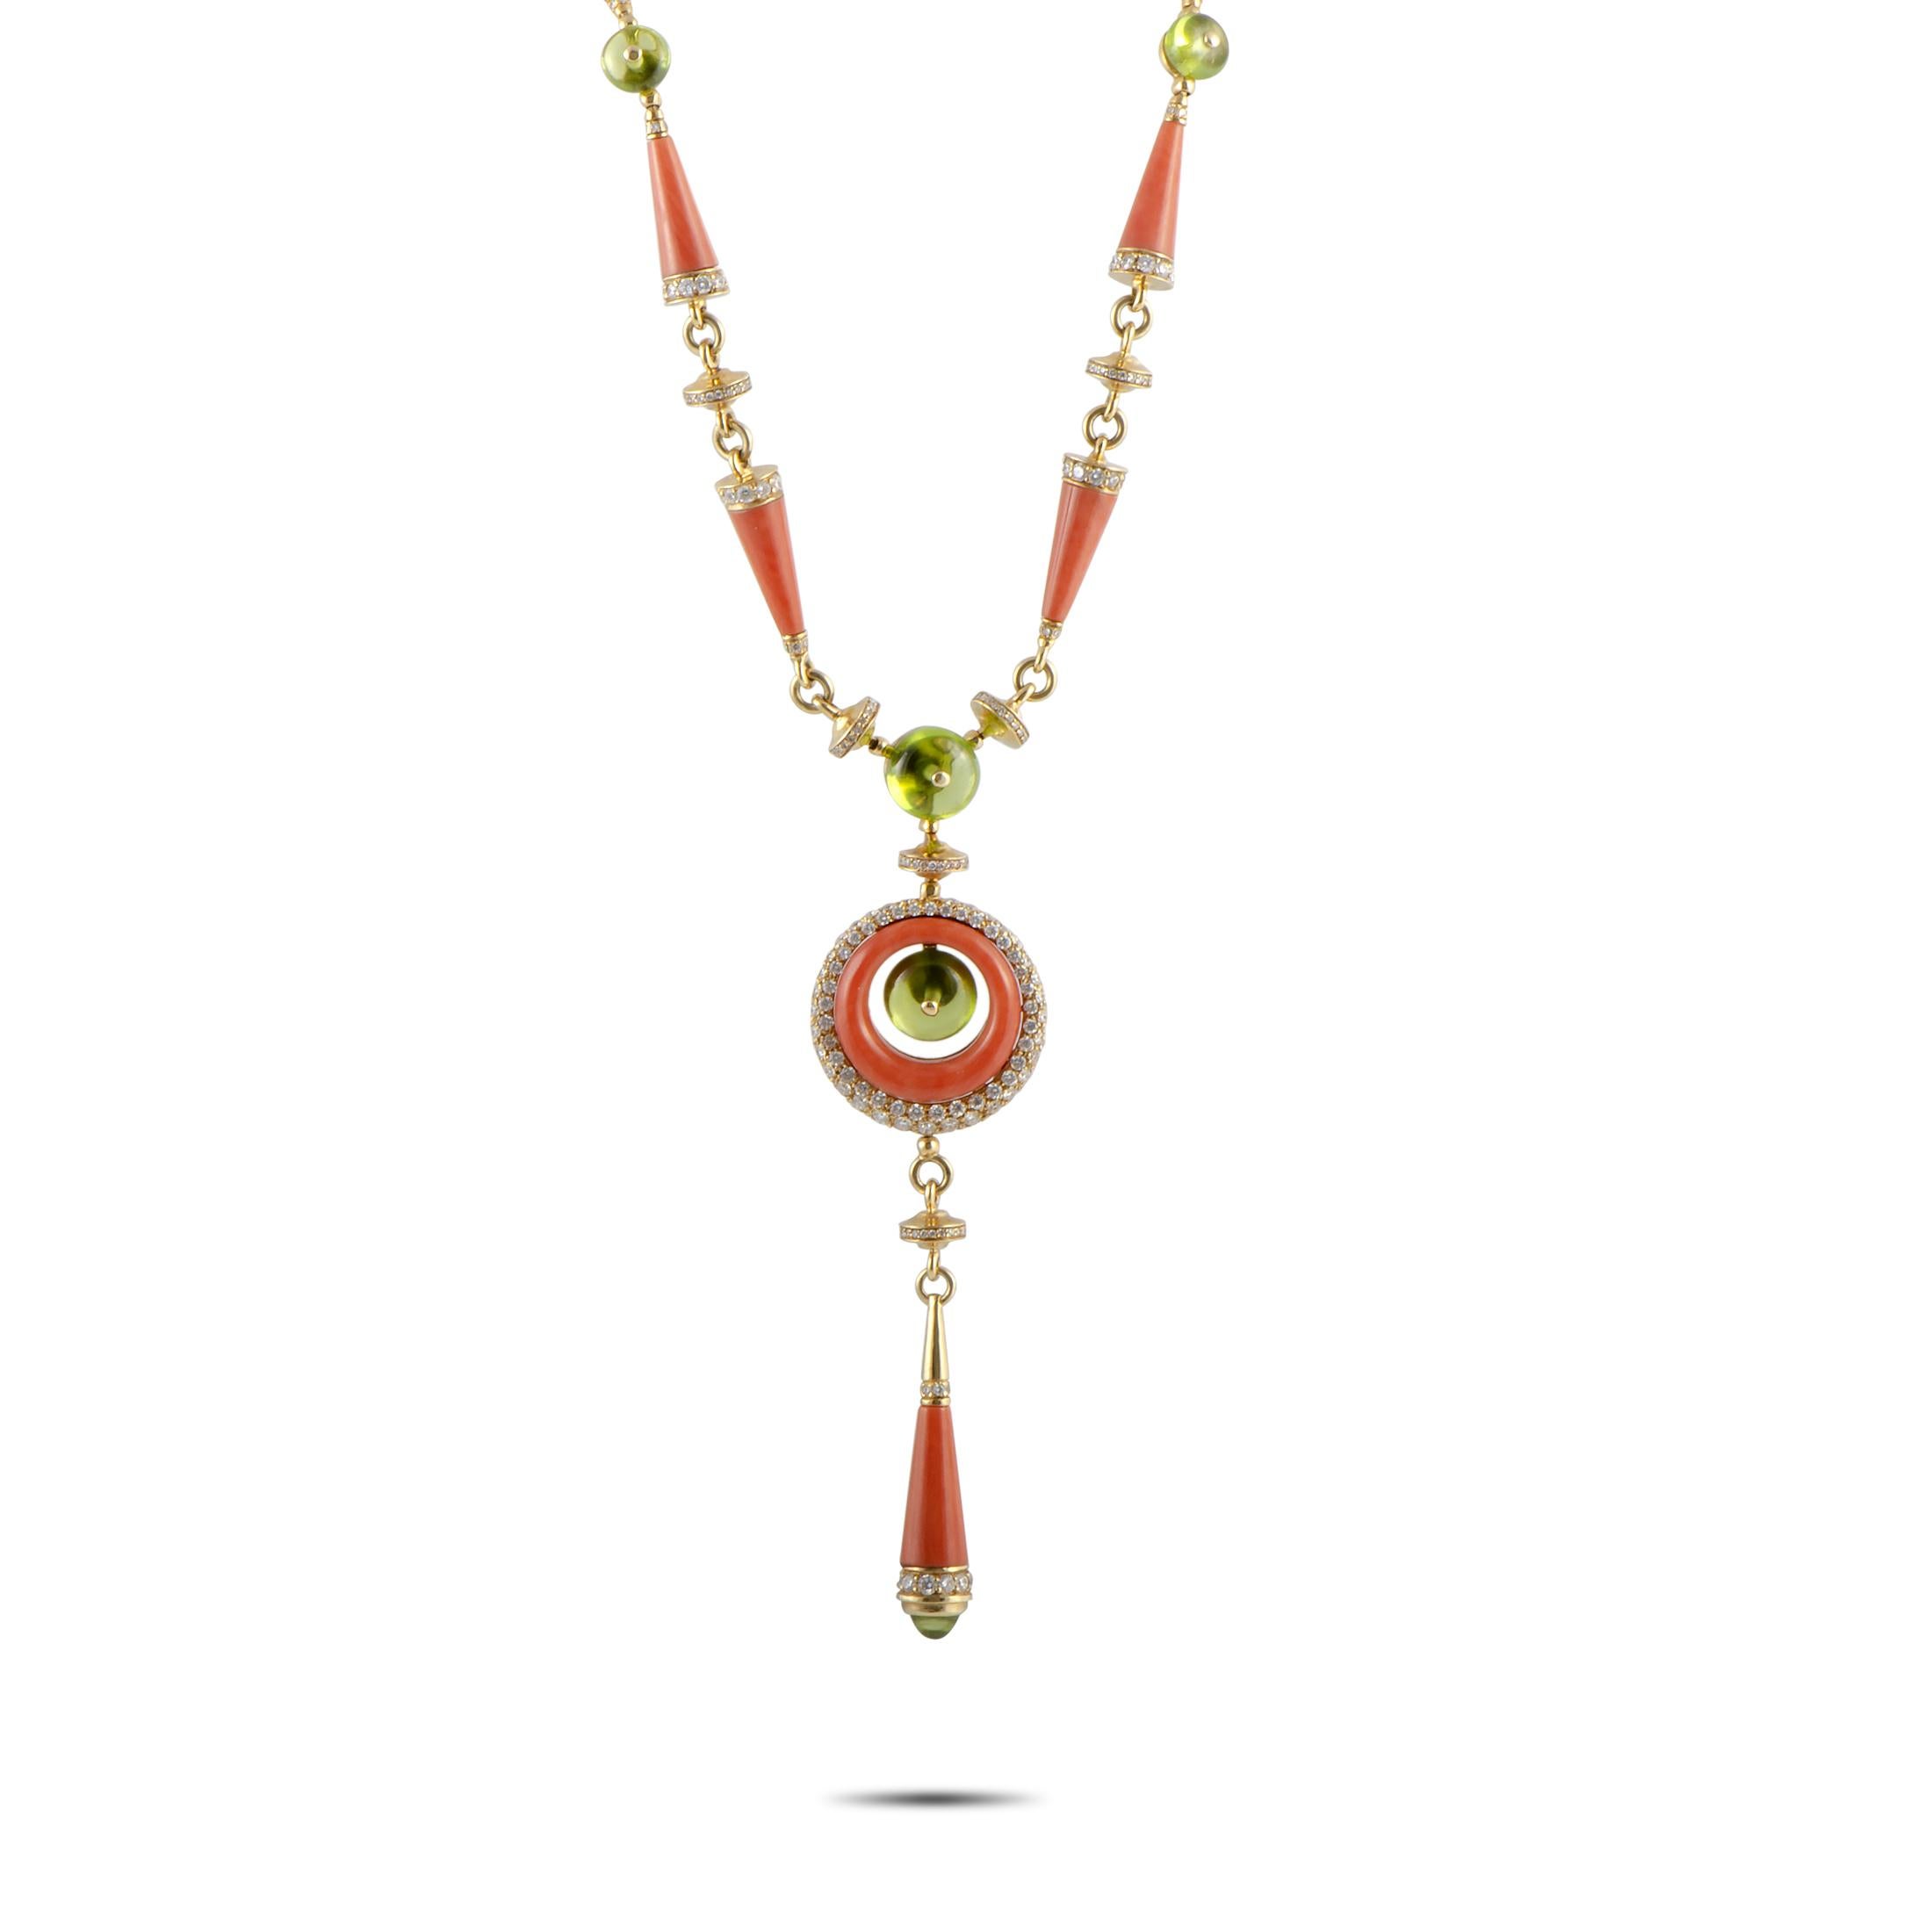 This Bvlgari set includes a necklace and a pair of earrings that are made of 18K yellow gold and set with peridot, coral and a total of 8.50 carats of diamonds.

The necklace weighs 55.3 grams and boasts chain length of 16.00”, with a pendant that